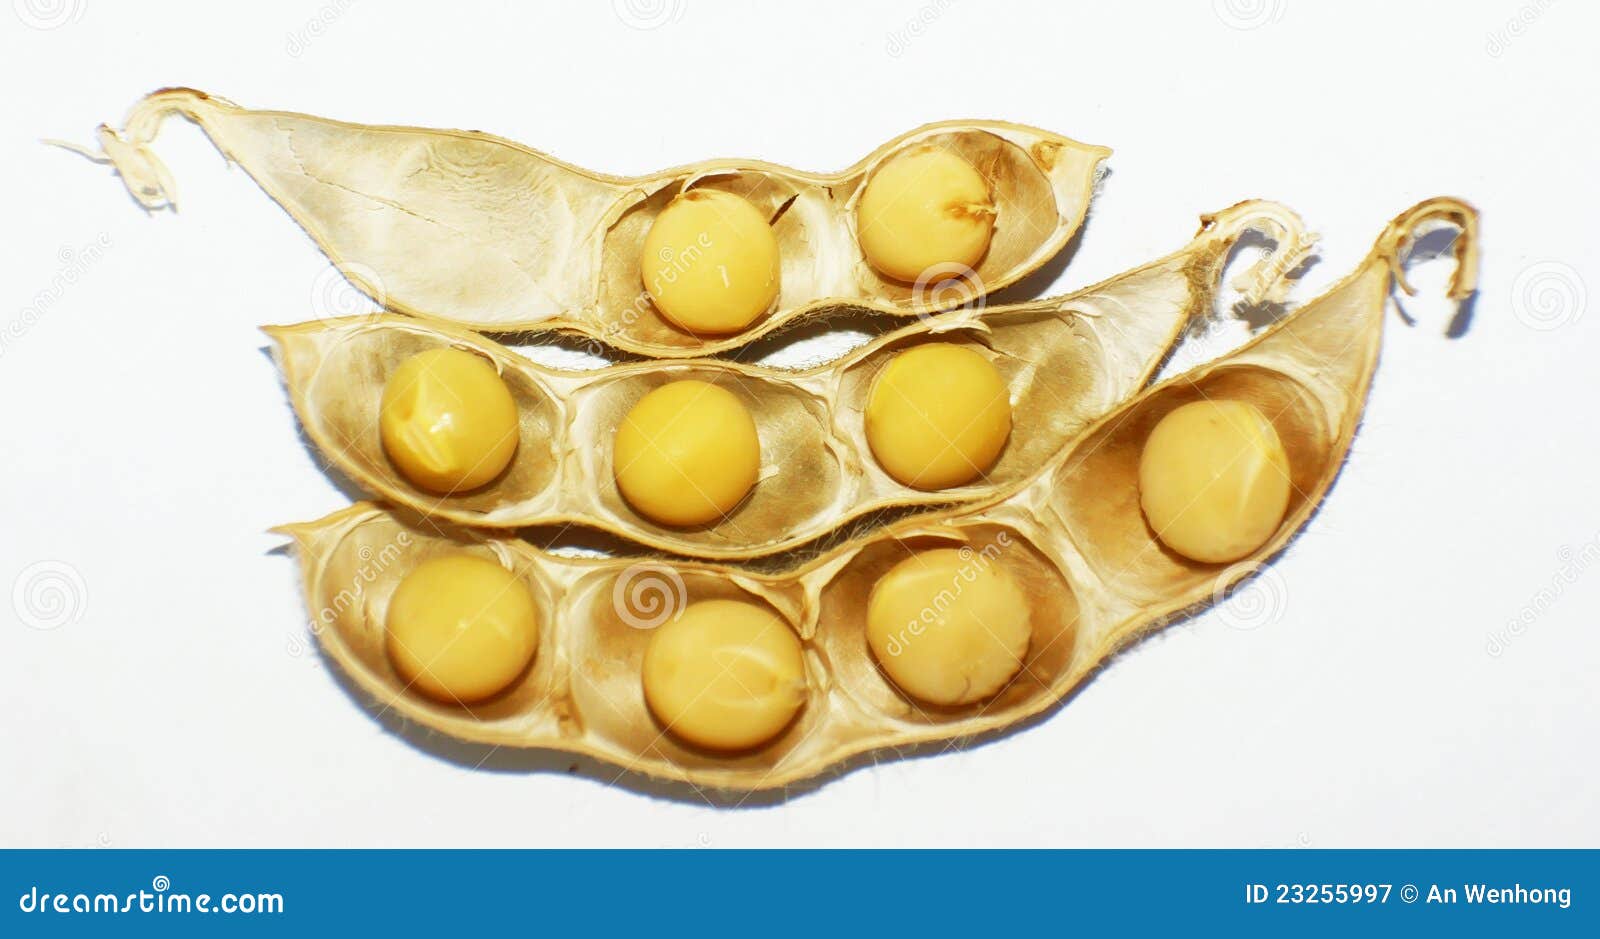 Soy pods and soybean stock image. Image of brown, yellow - 23255997